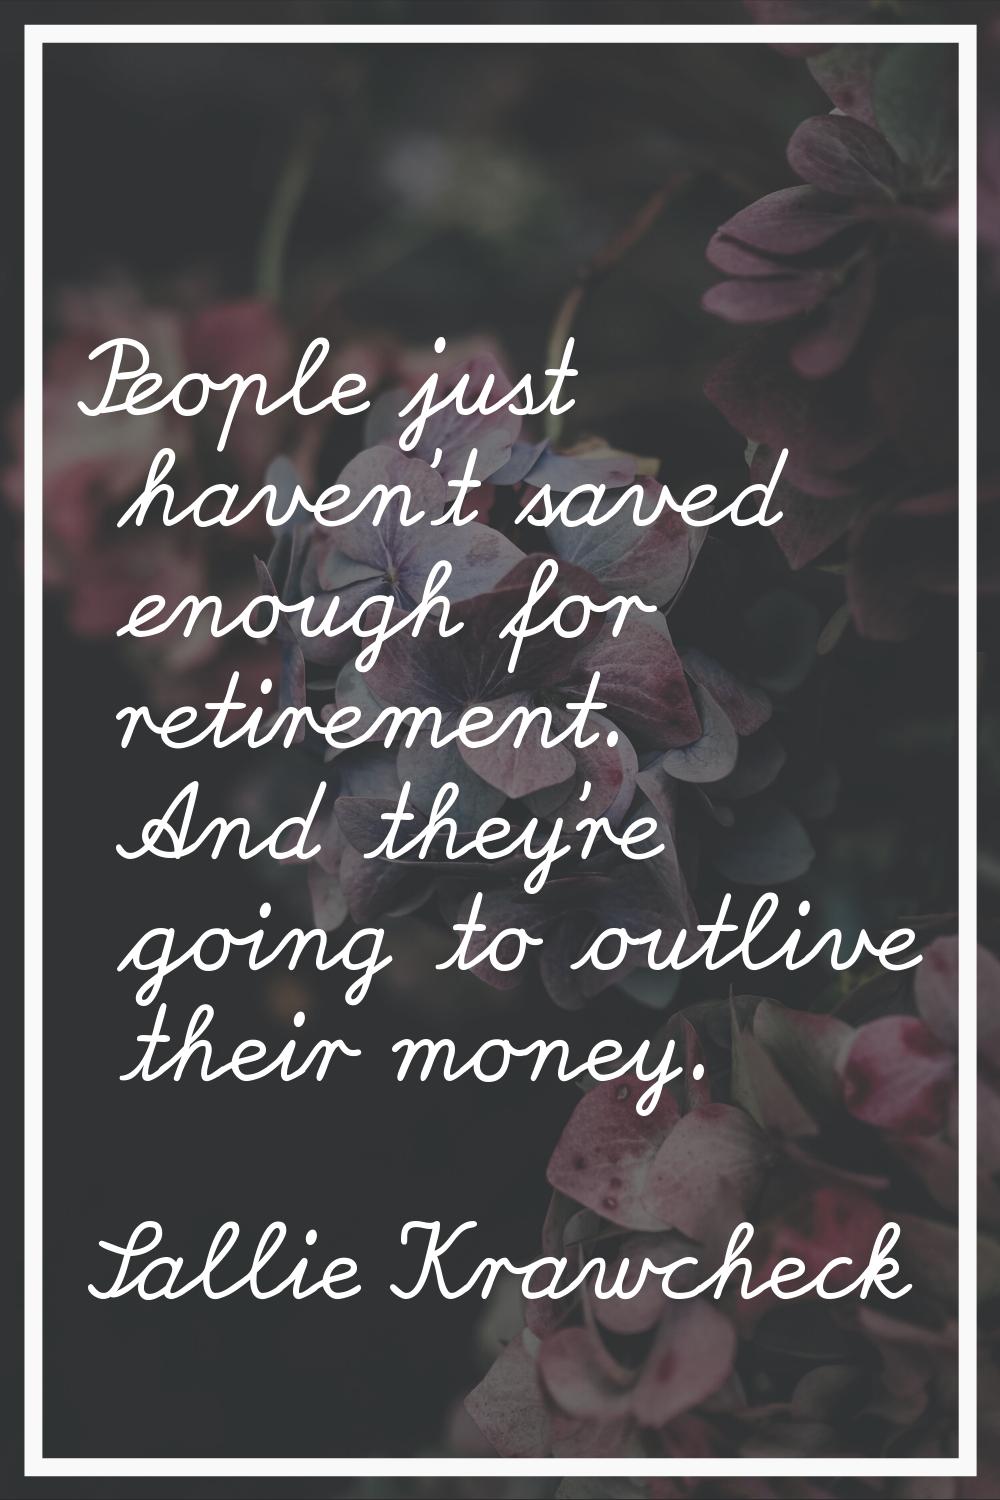 People just haven't saved enough for retirement. And they're going to outlive their money.